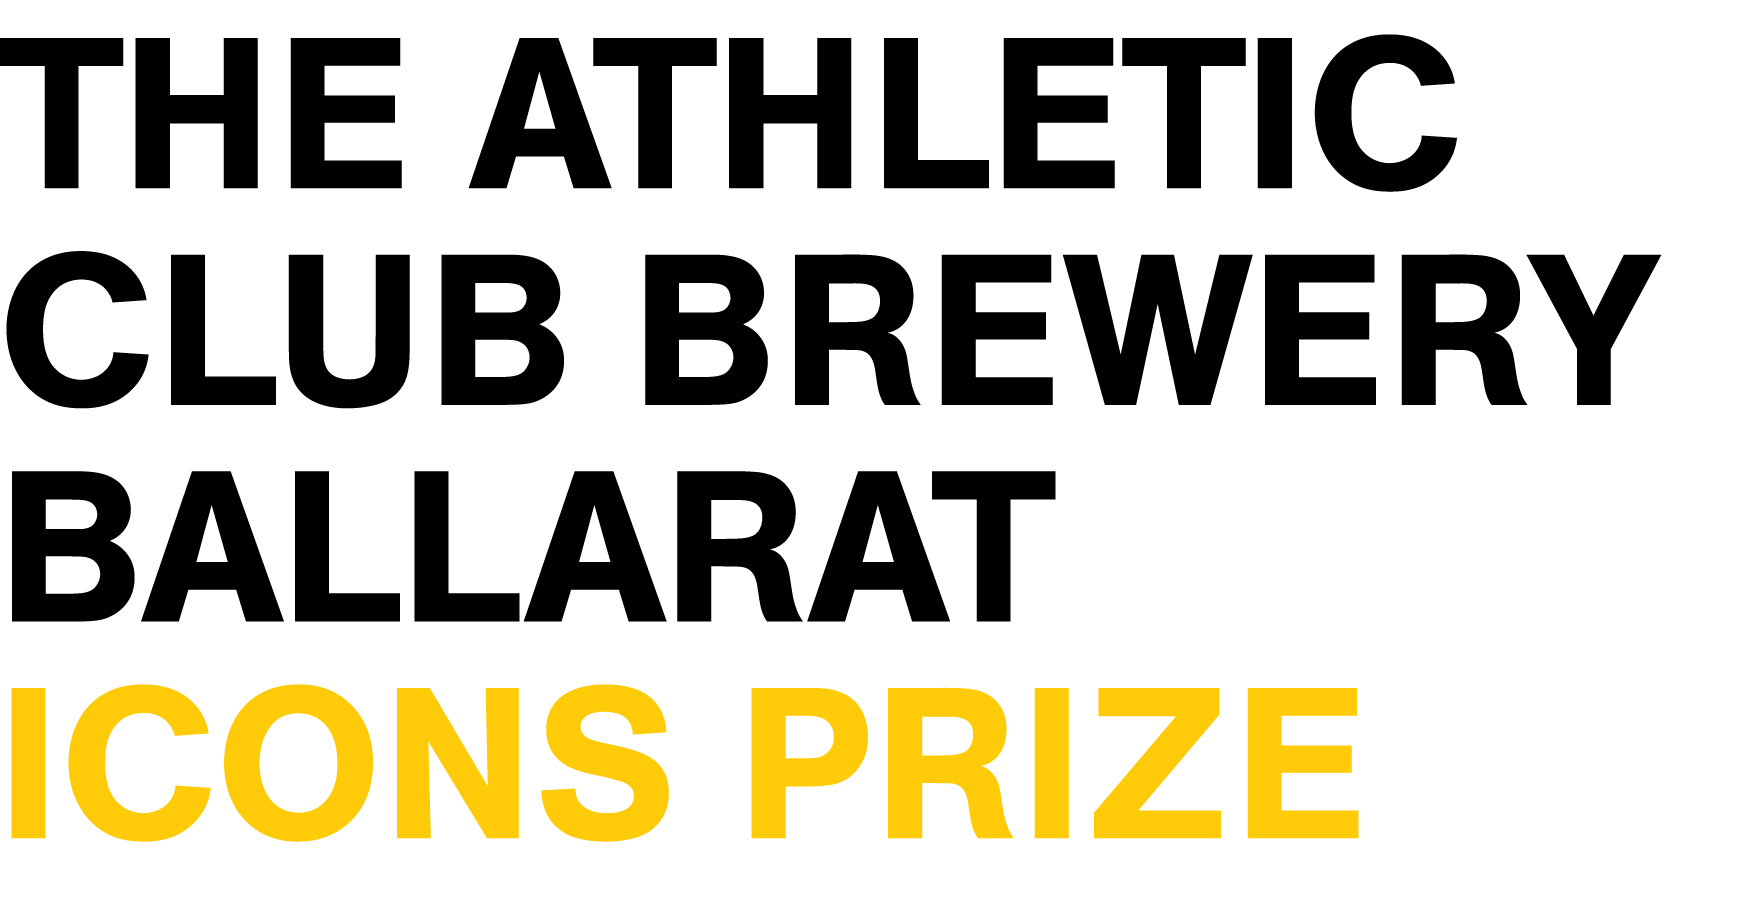 THE ATHLETIC CLUB BREWERY BALLARAT ICONS PRIZE ENTRY